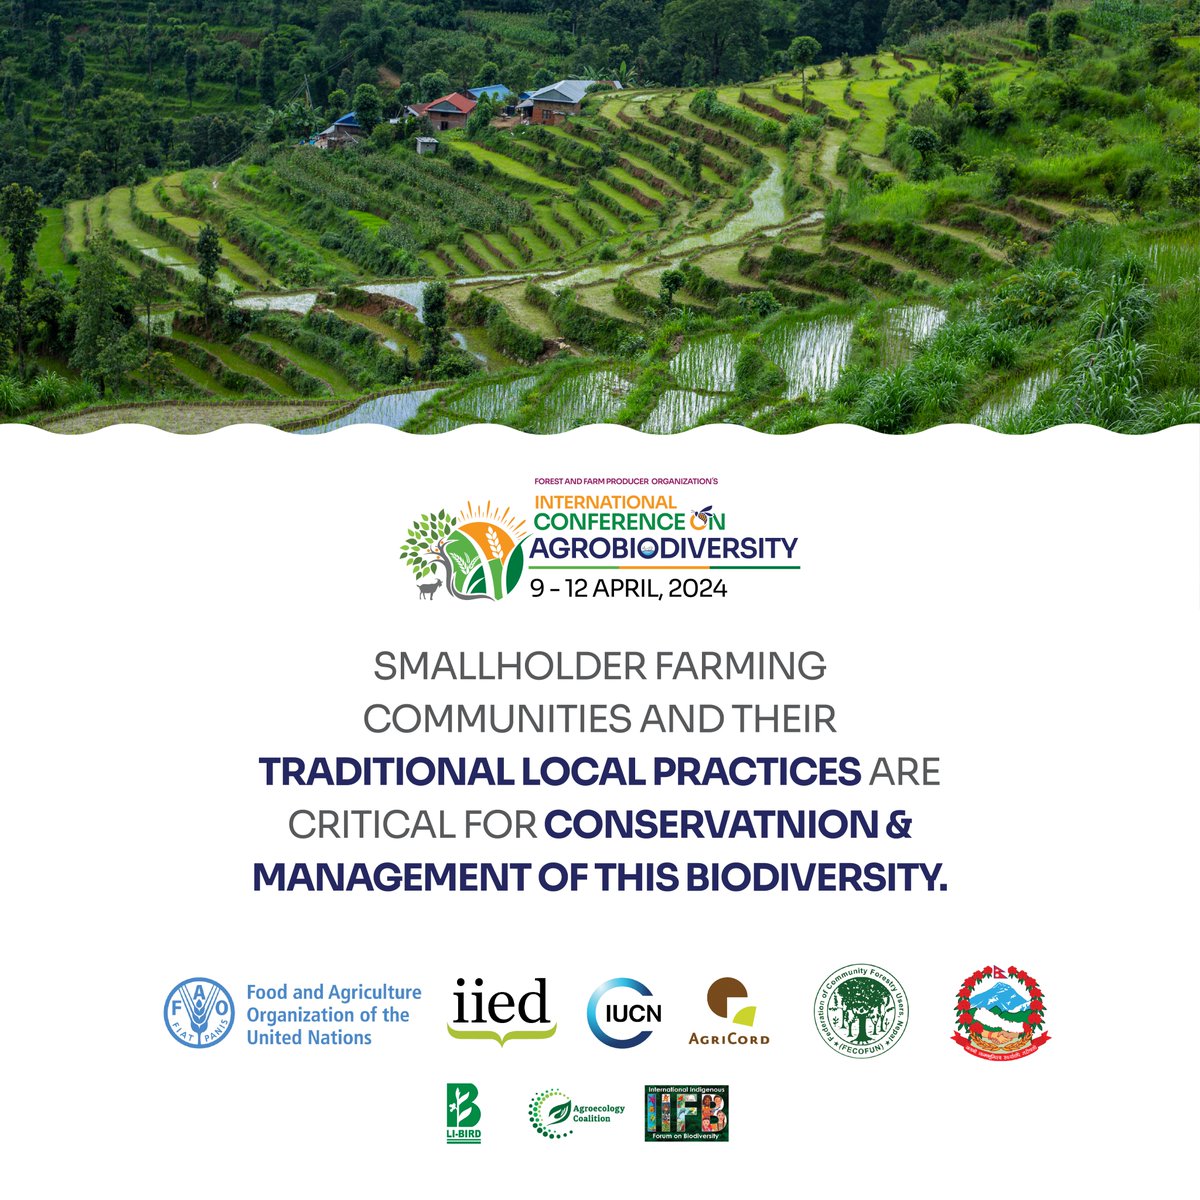 Please register to the link fao.zoom.us/webinar/regist… for the virtual participation in International Conference on Agrobiodiversity #ICA2024 #FFF #InternationalConferenceonAgrobiodiversity #4Betters